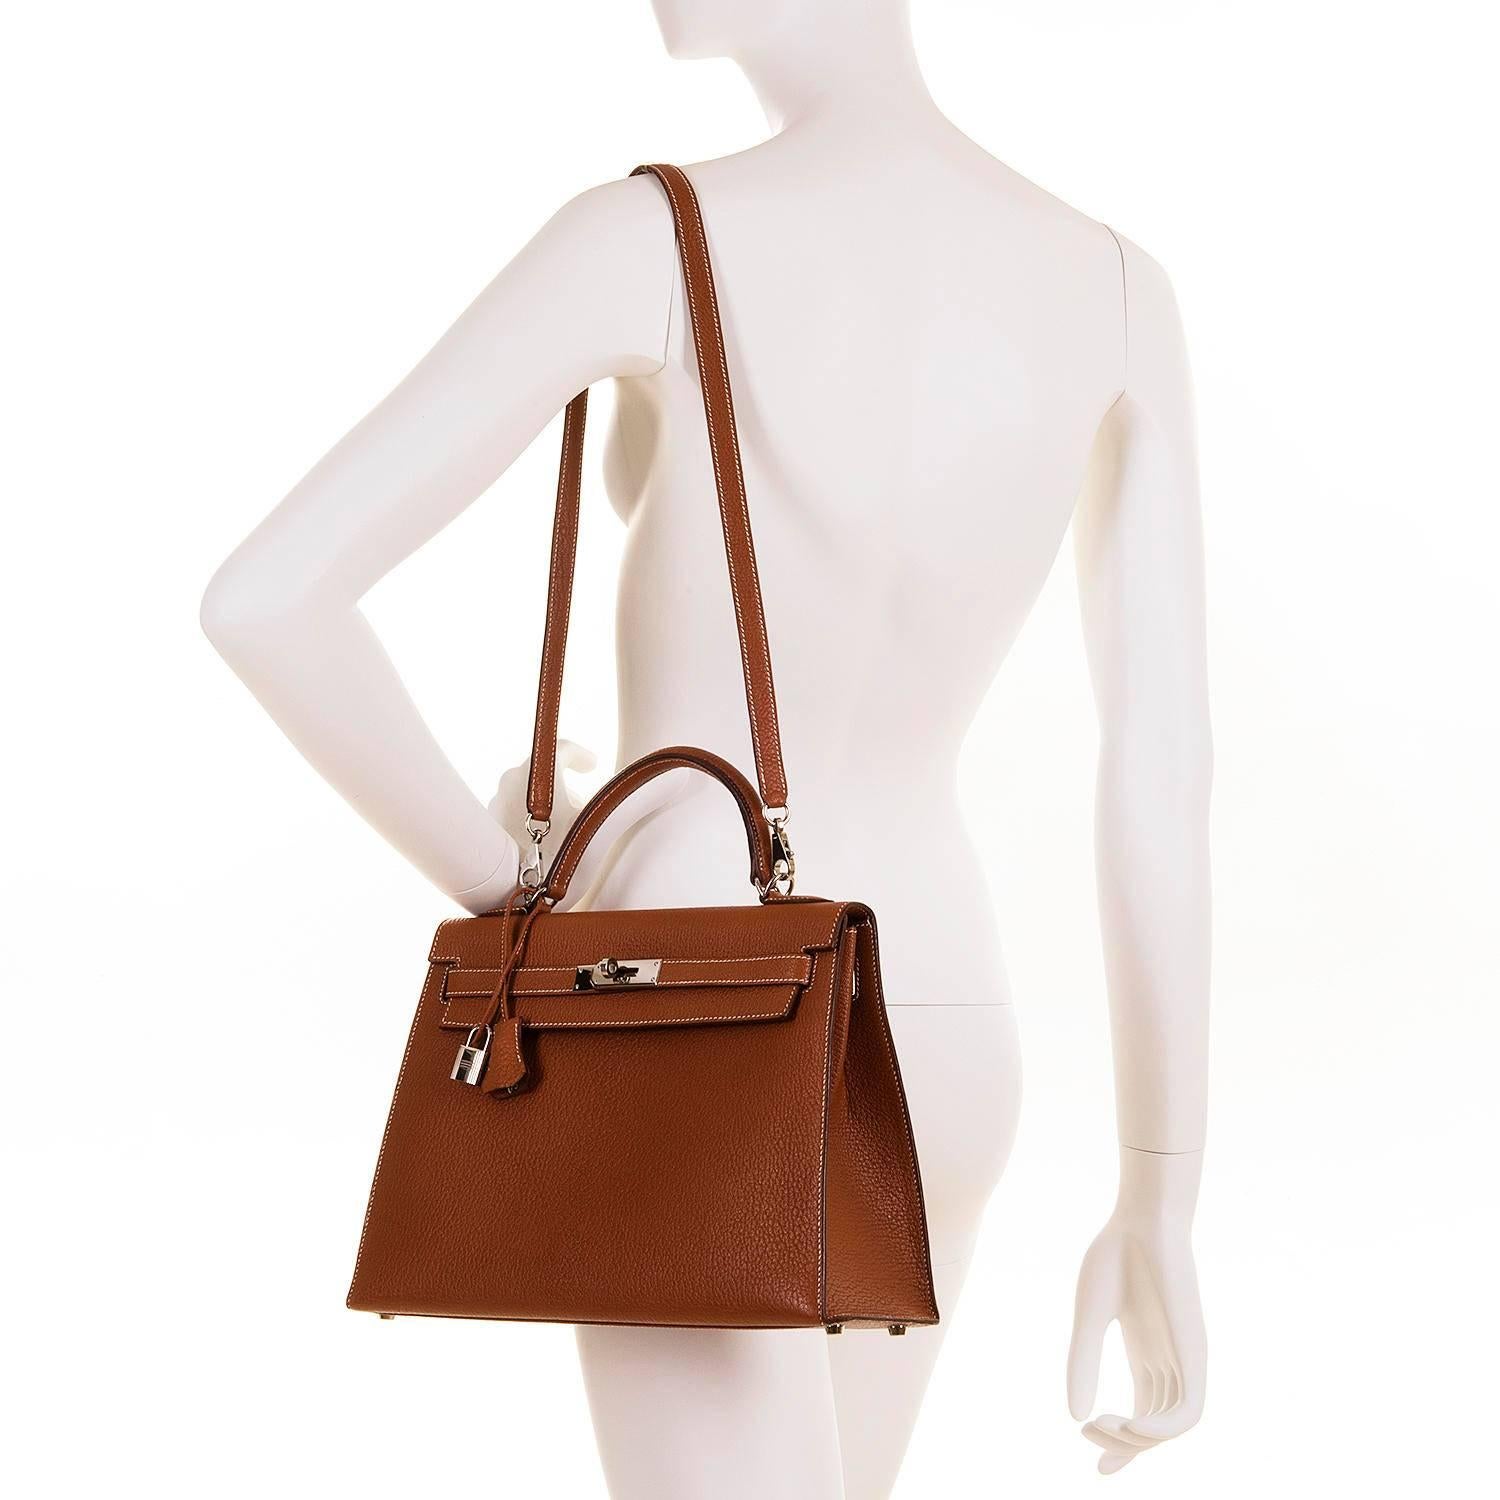 Brown As New Pristine Hermes 32cm Kelly Sellier Bag in 'Rouille' Clemence Leather SHW